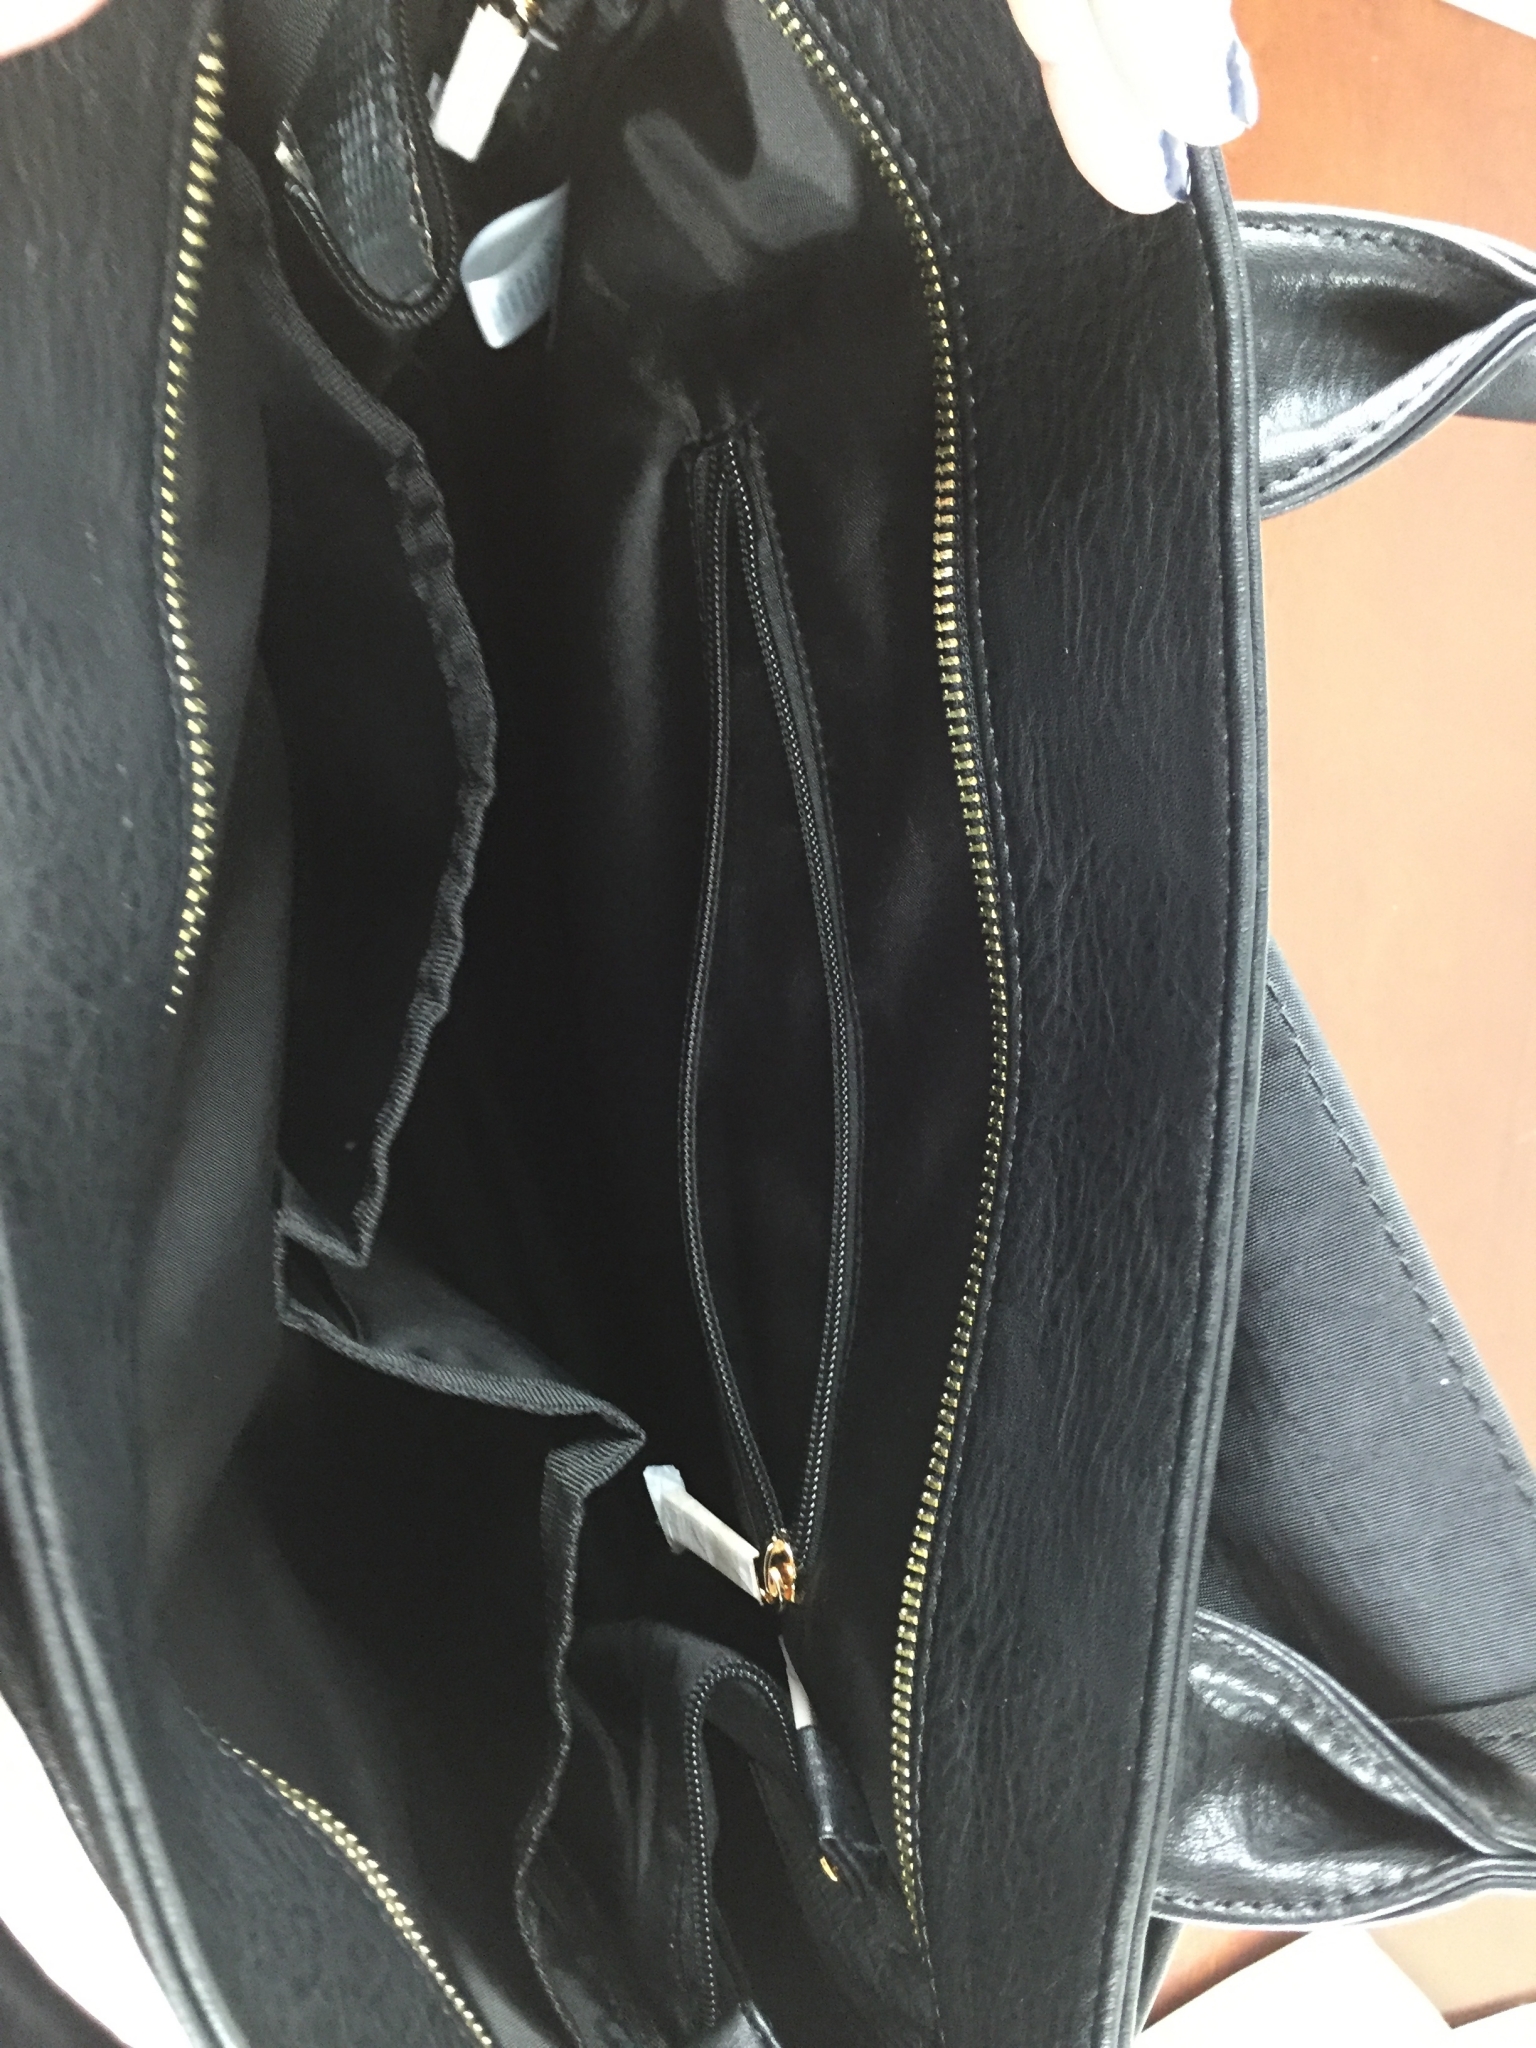 Honest Company Everything Tote + City Backpack Review - Hello Subscription